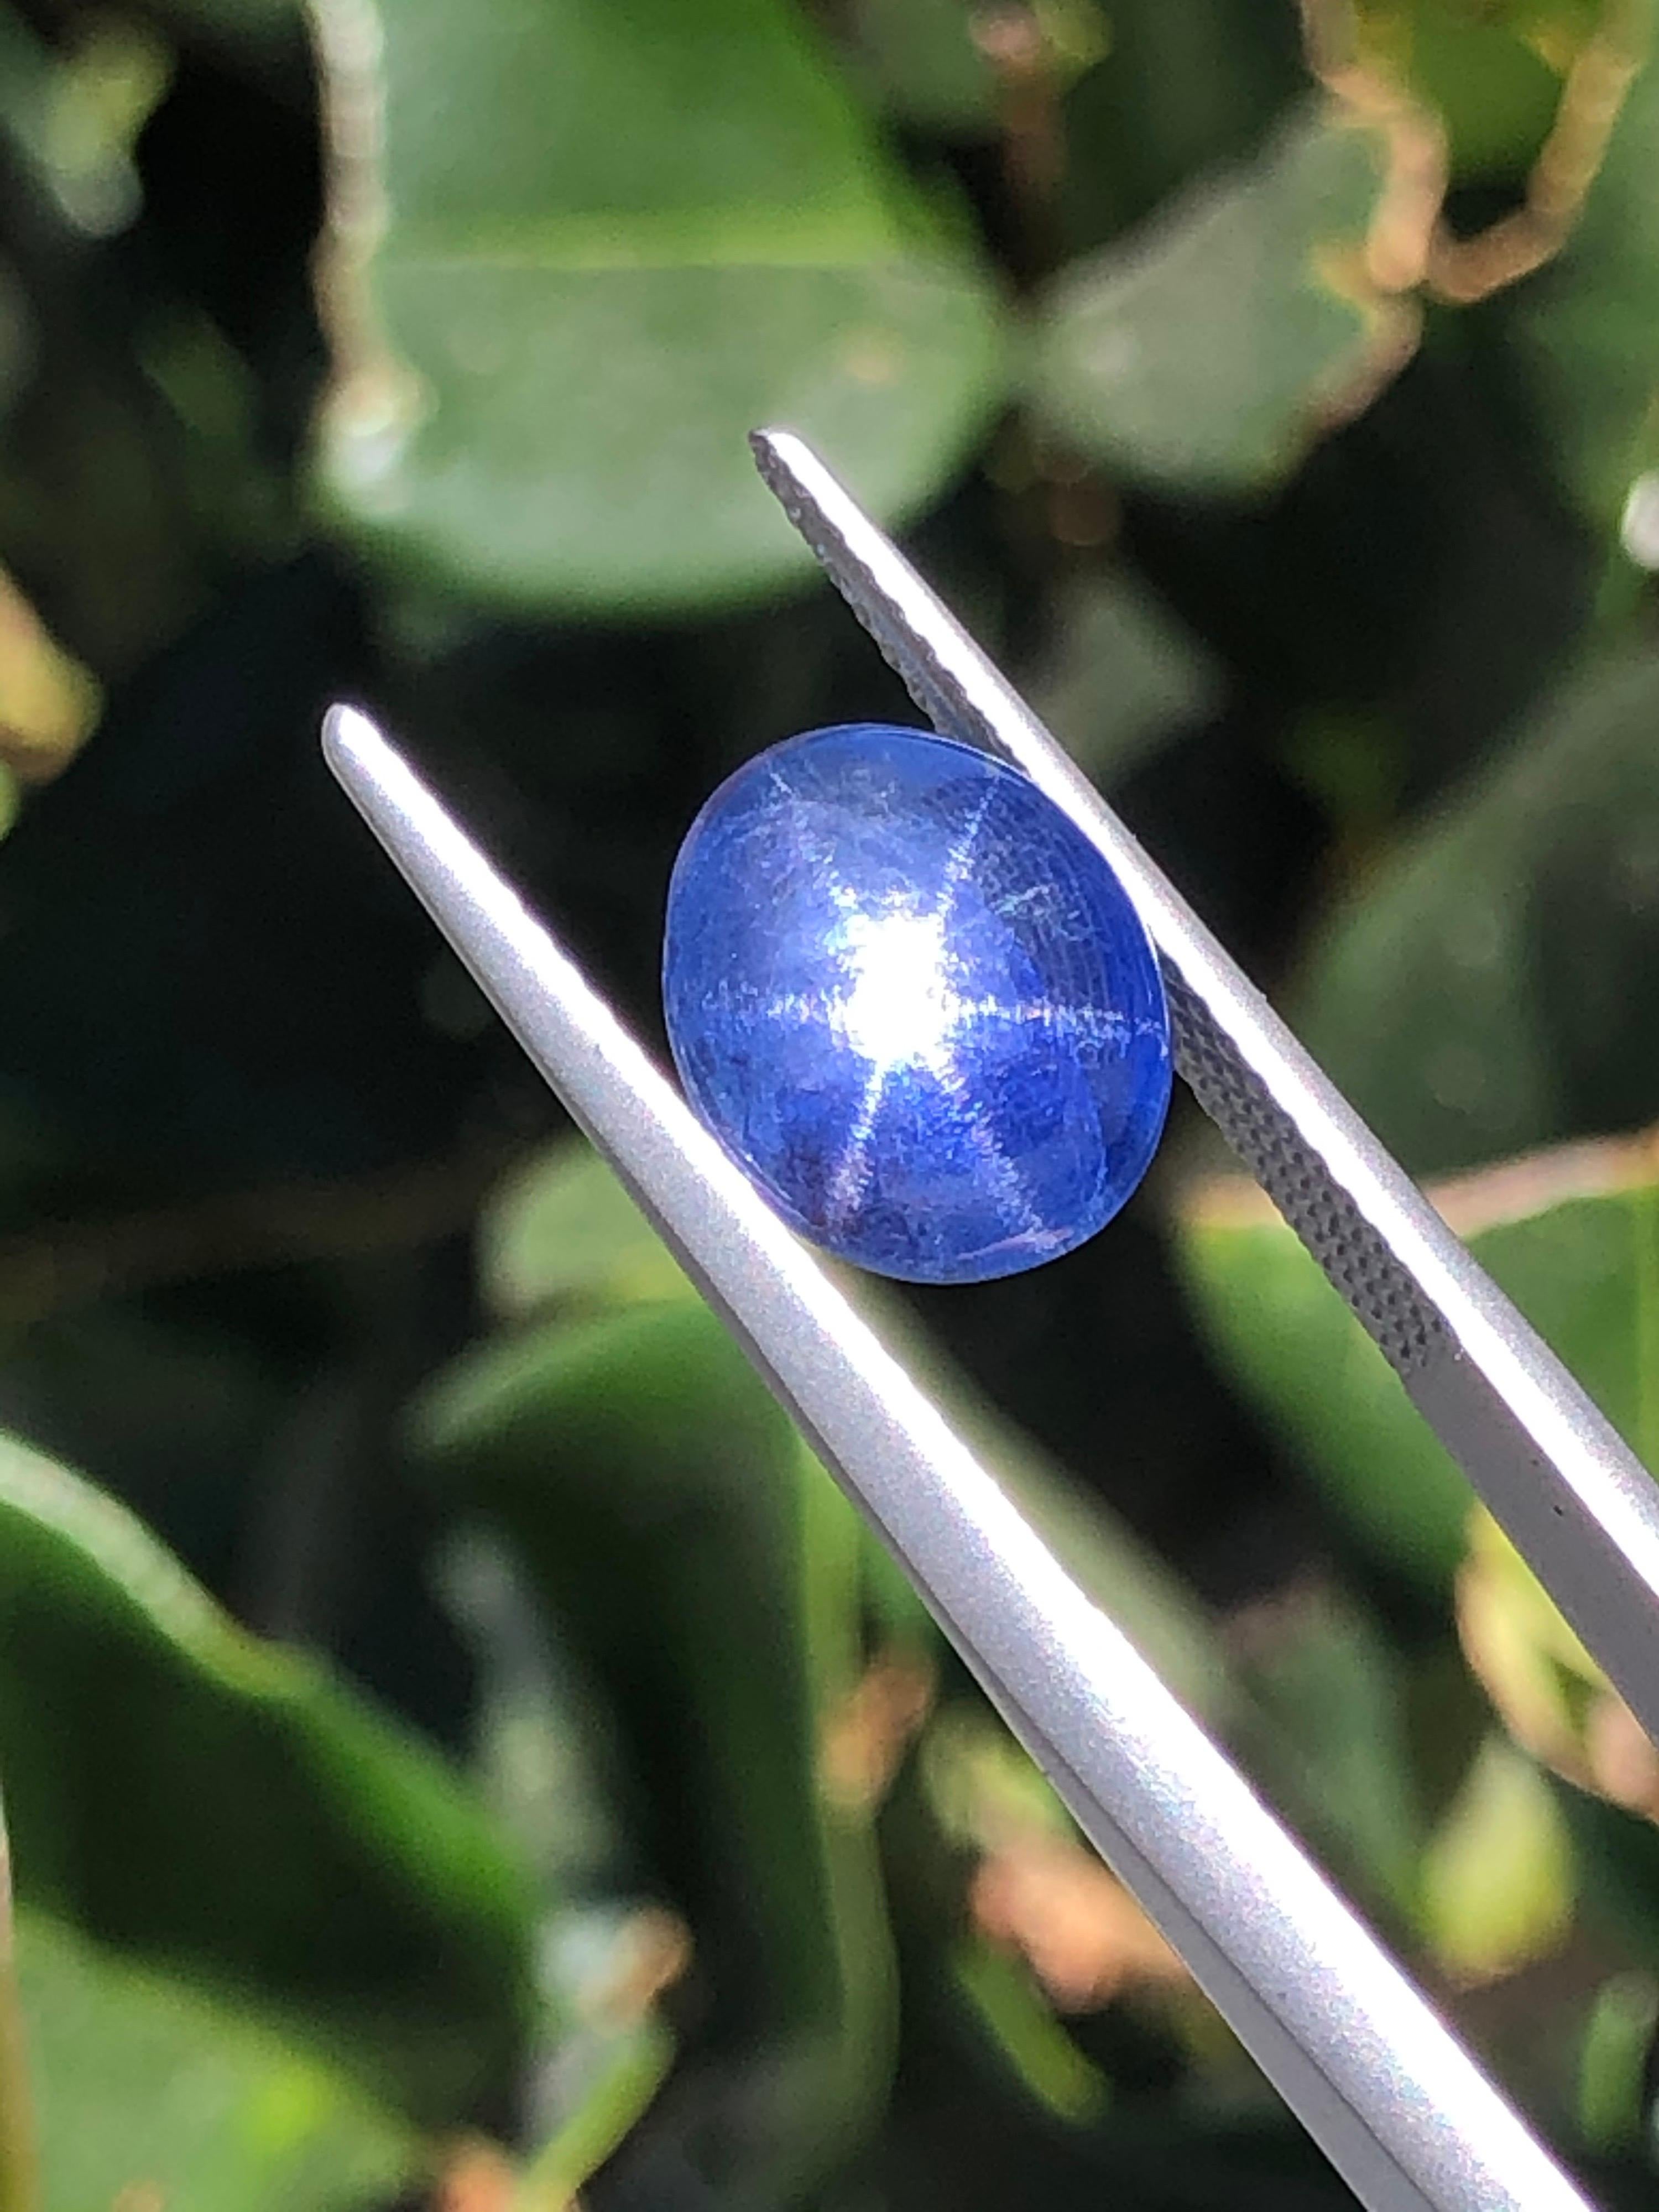 Remarkable 4.19 carat unheated Ceylon Star Sapphire offered loose for a classy lady or gentleman.
This exclusive no heat Star Sapphire would make an exquisite custom tailored jewelry creation.
Returns are accepted and paid by us within 7 days of